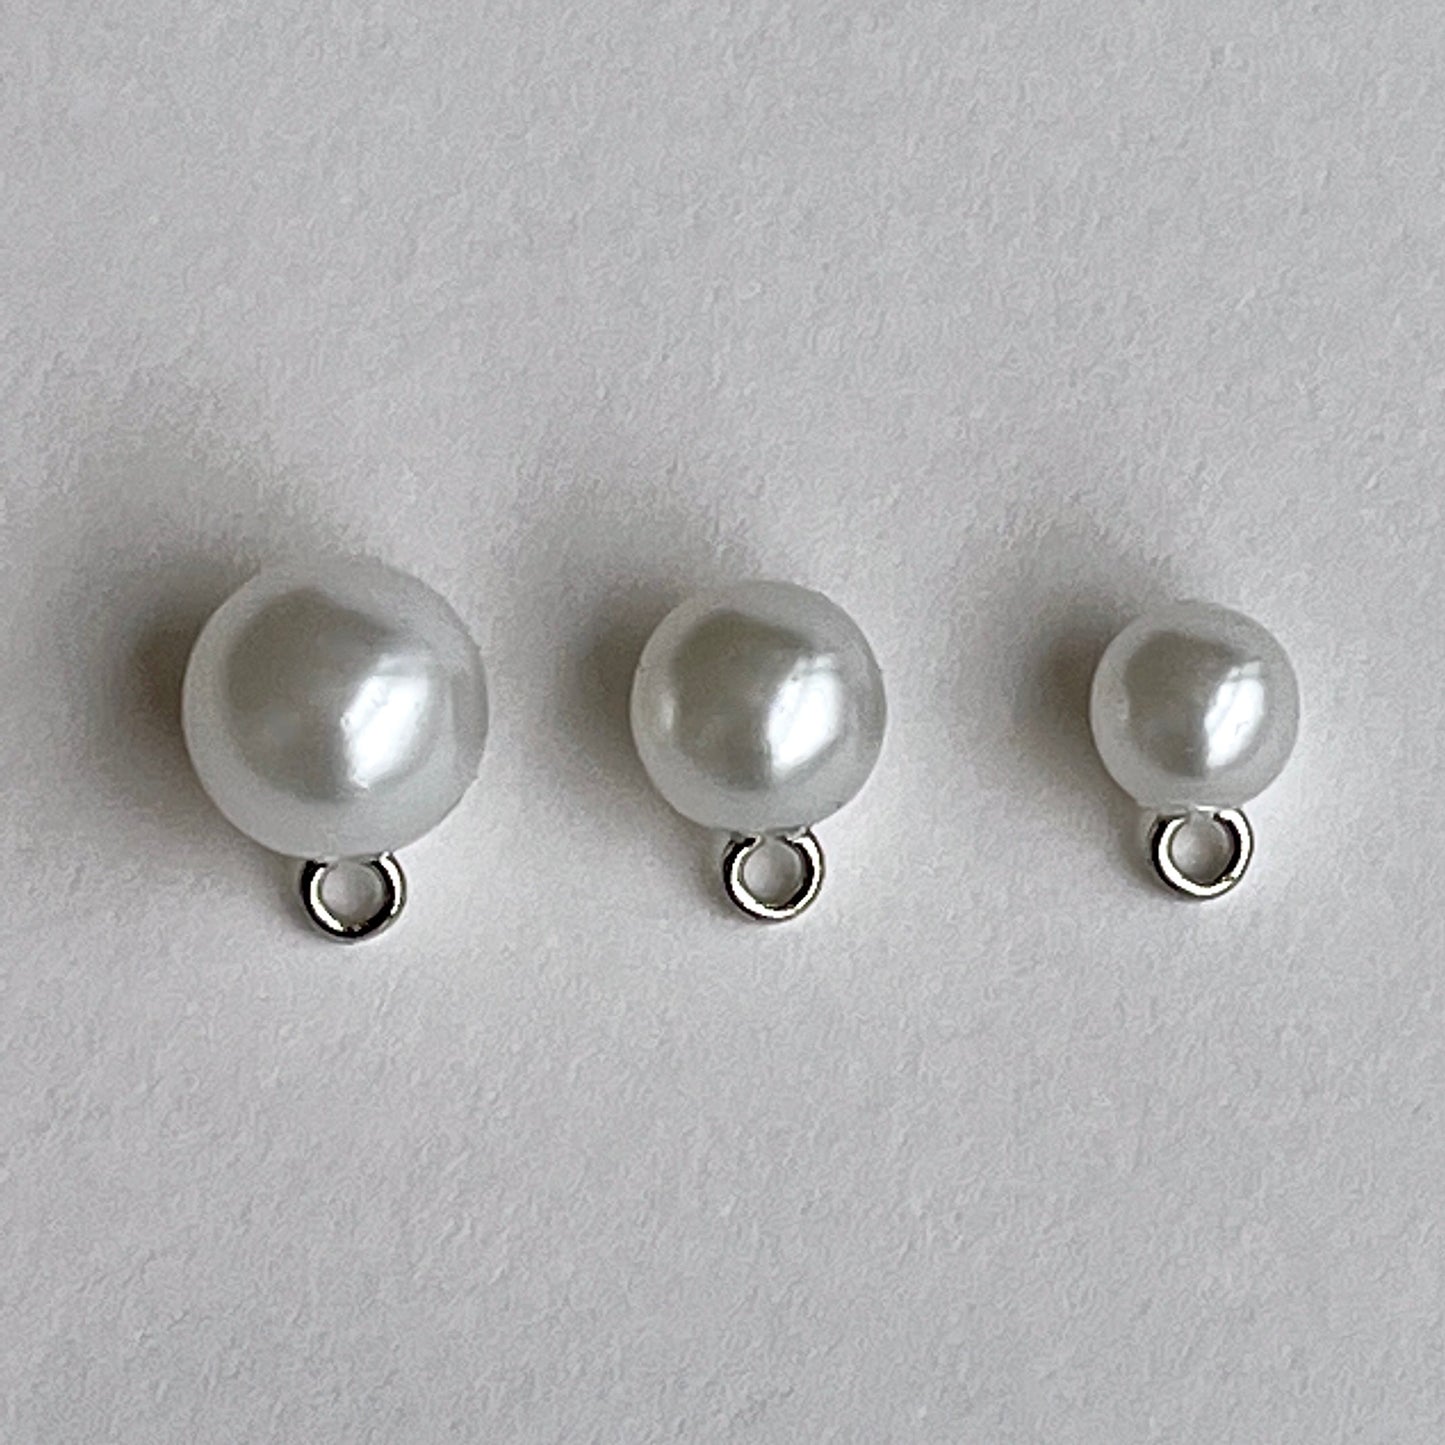 Pearl Bridal Buttons with Metal Shanks